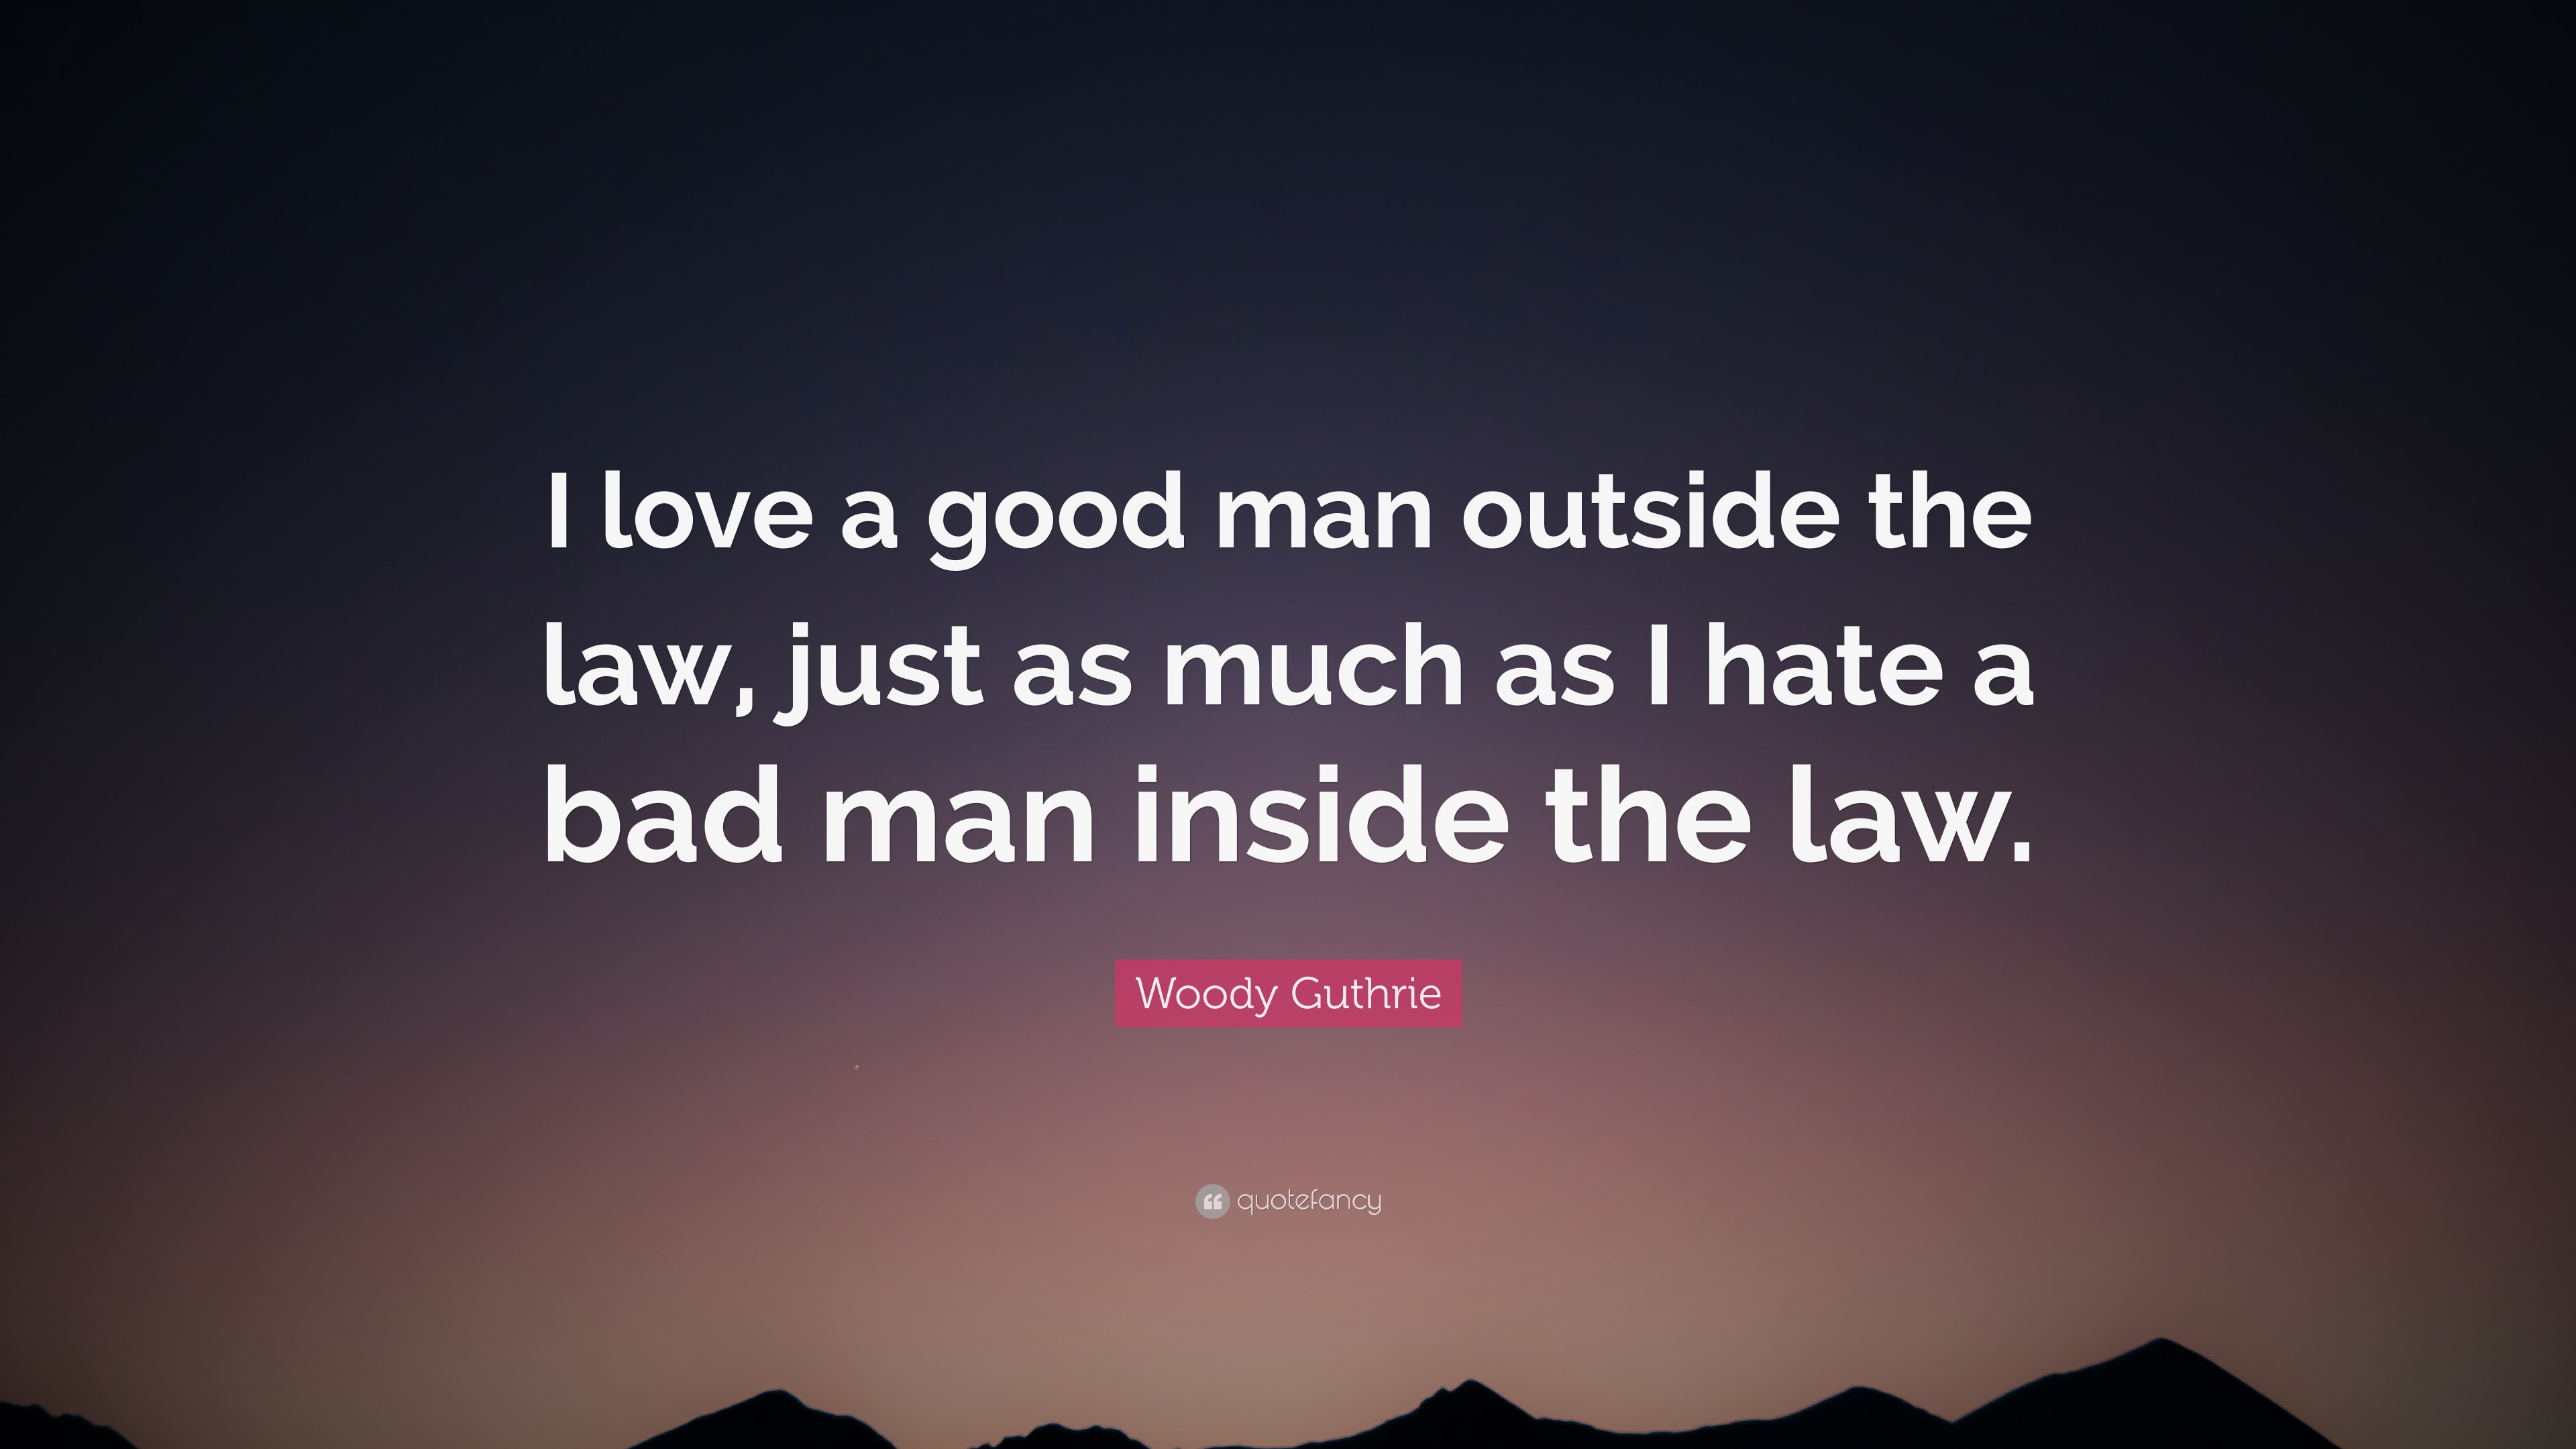 Woody Guthrie Quote “I love a good man outside the law just as